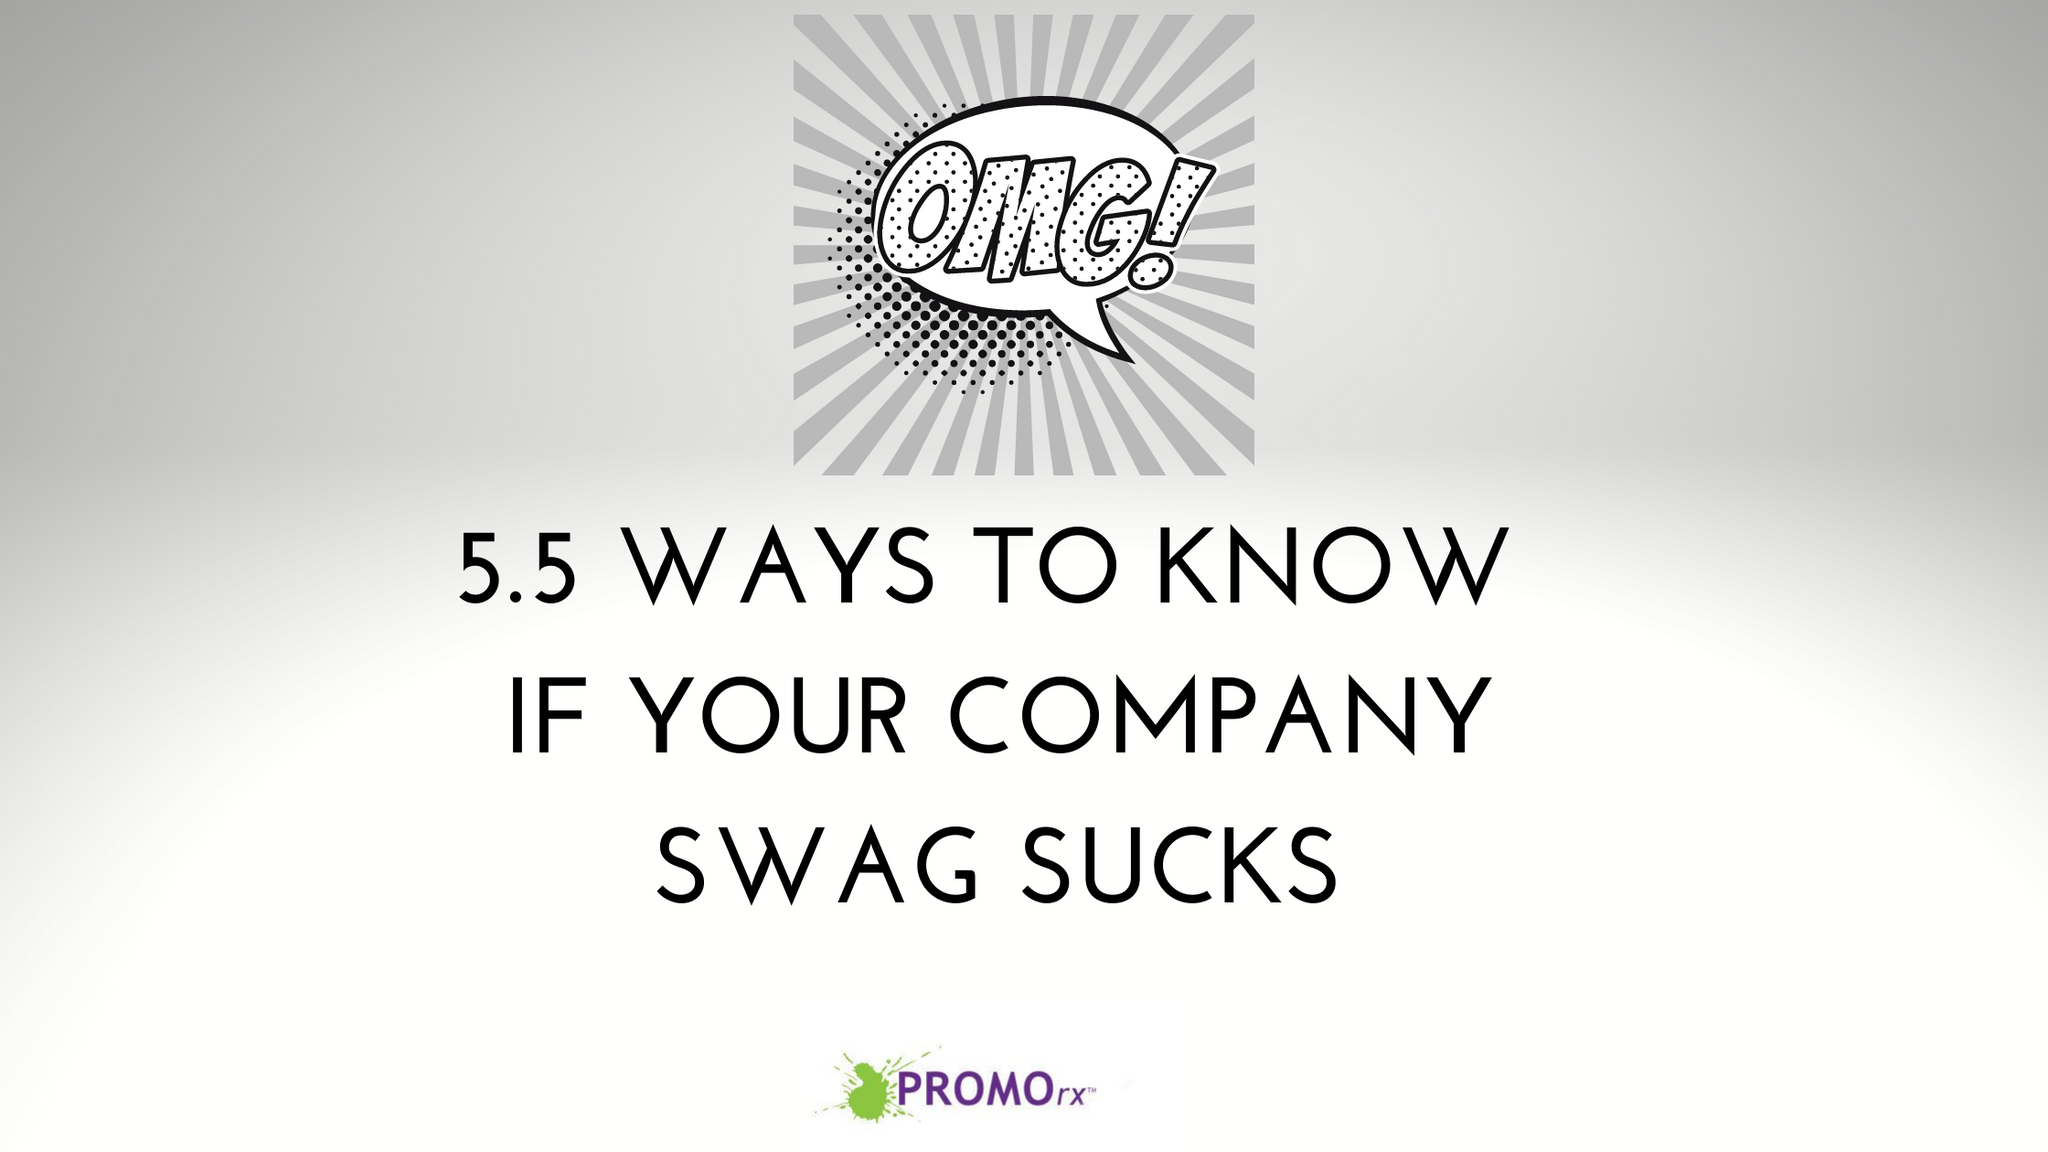 5.5 Ways to Know if Your Company Swag Sucks